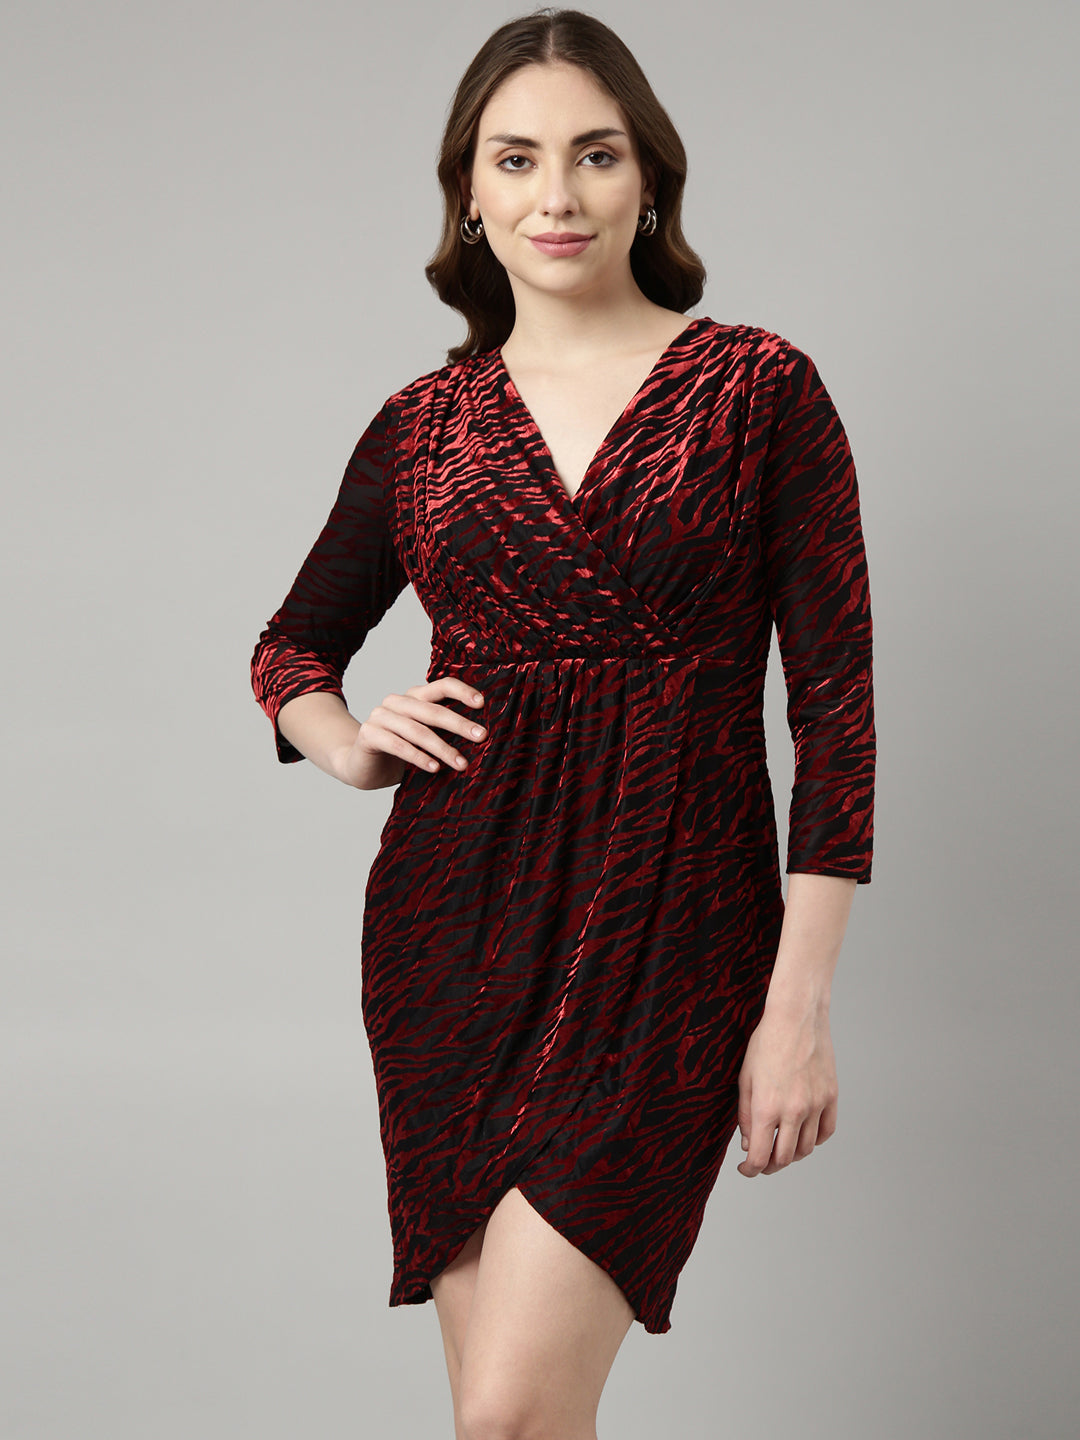 Women Red Abstract Bodycon Dress